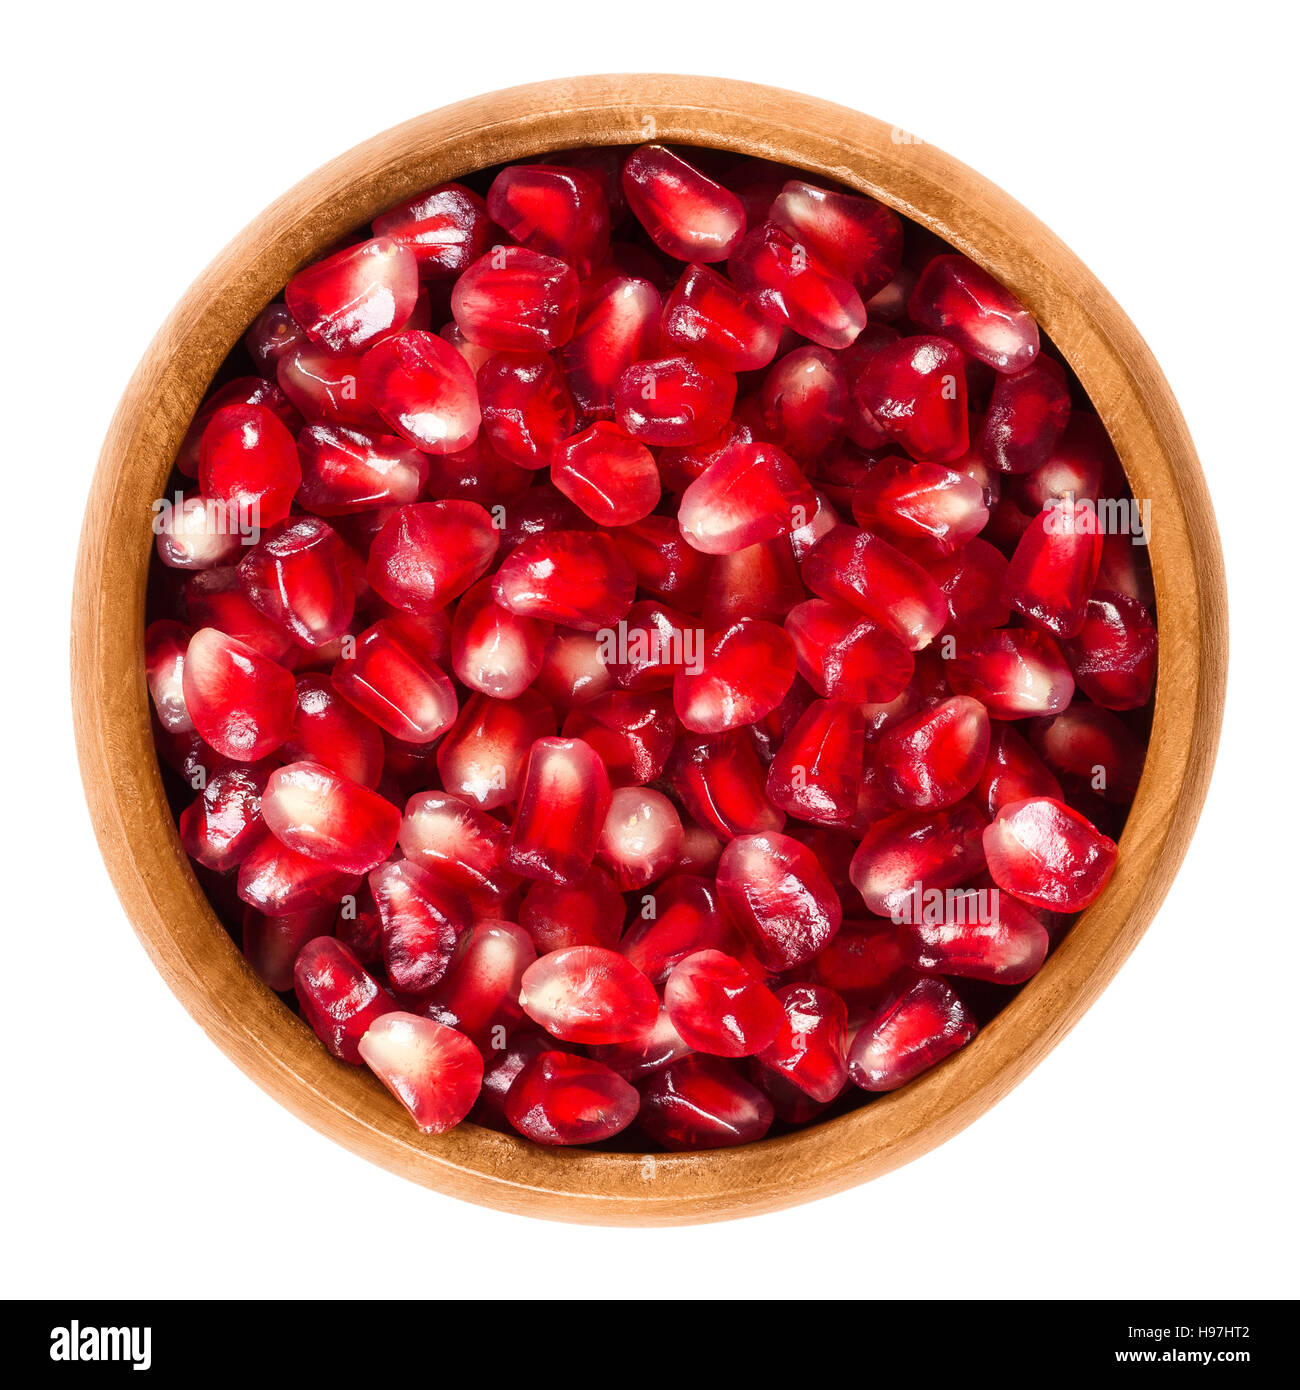 Fresh pomegranate seeds in wooden bowl. Edible red seeds from the fruit of Punica granatum, separated from the peel. Stock Photo